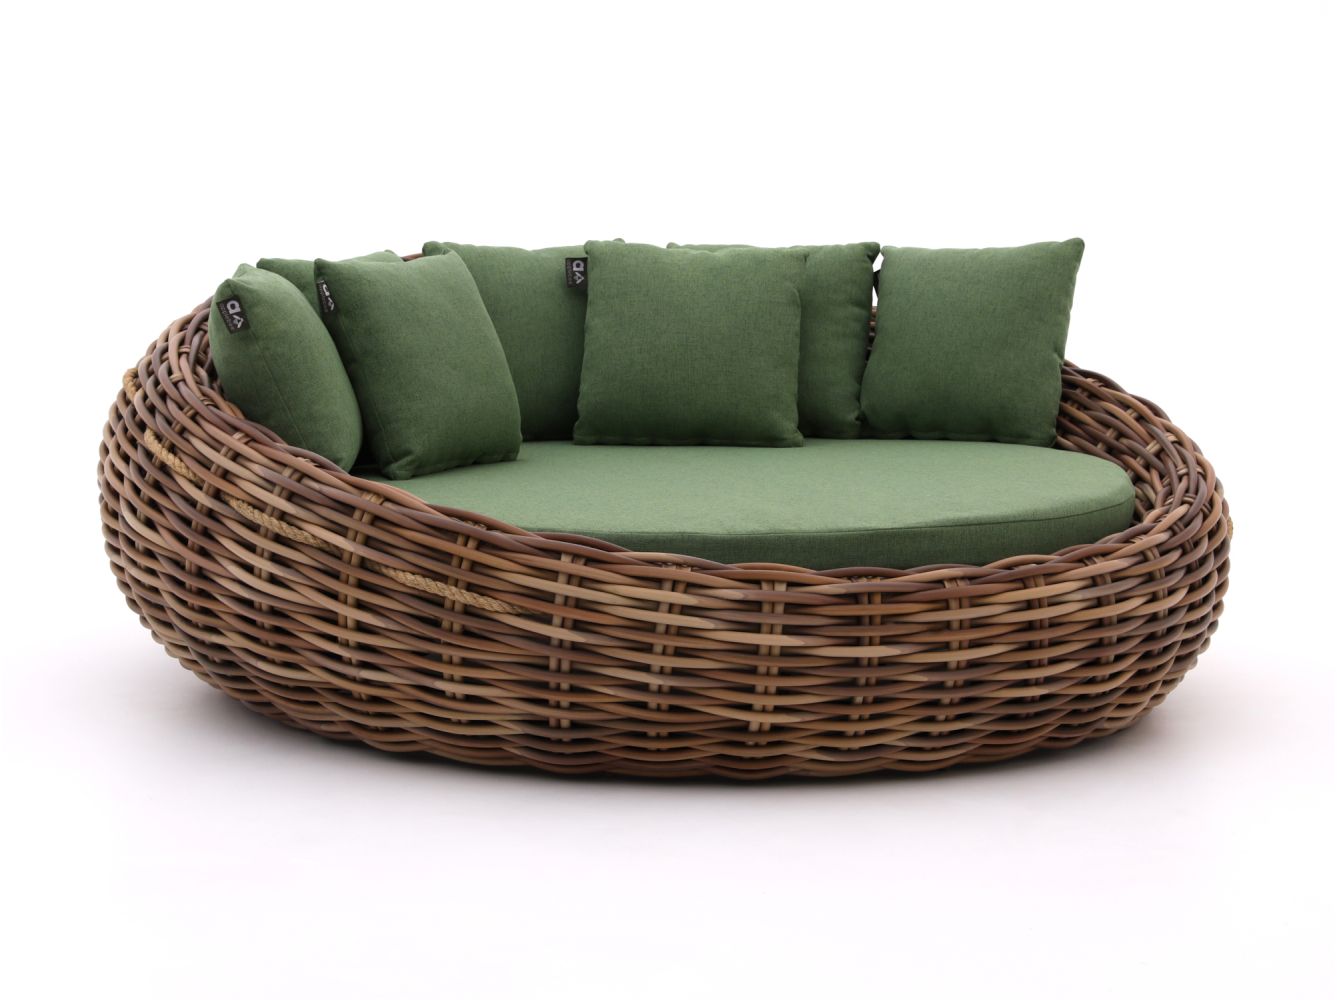 e5de7d777f702e508606e444730a78fb735077db 120422 p01 jeqi4uqelqazekq2 - Apple Bee Cocoon lounge Daybed